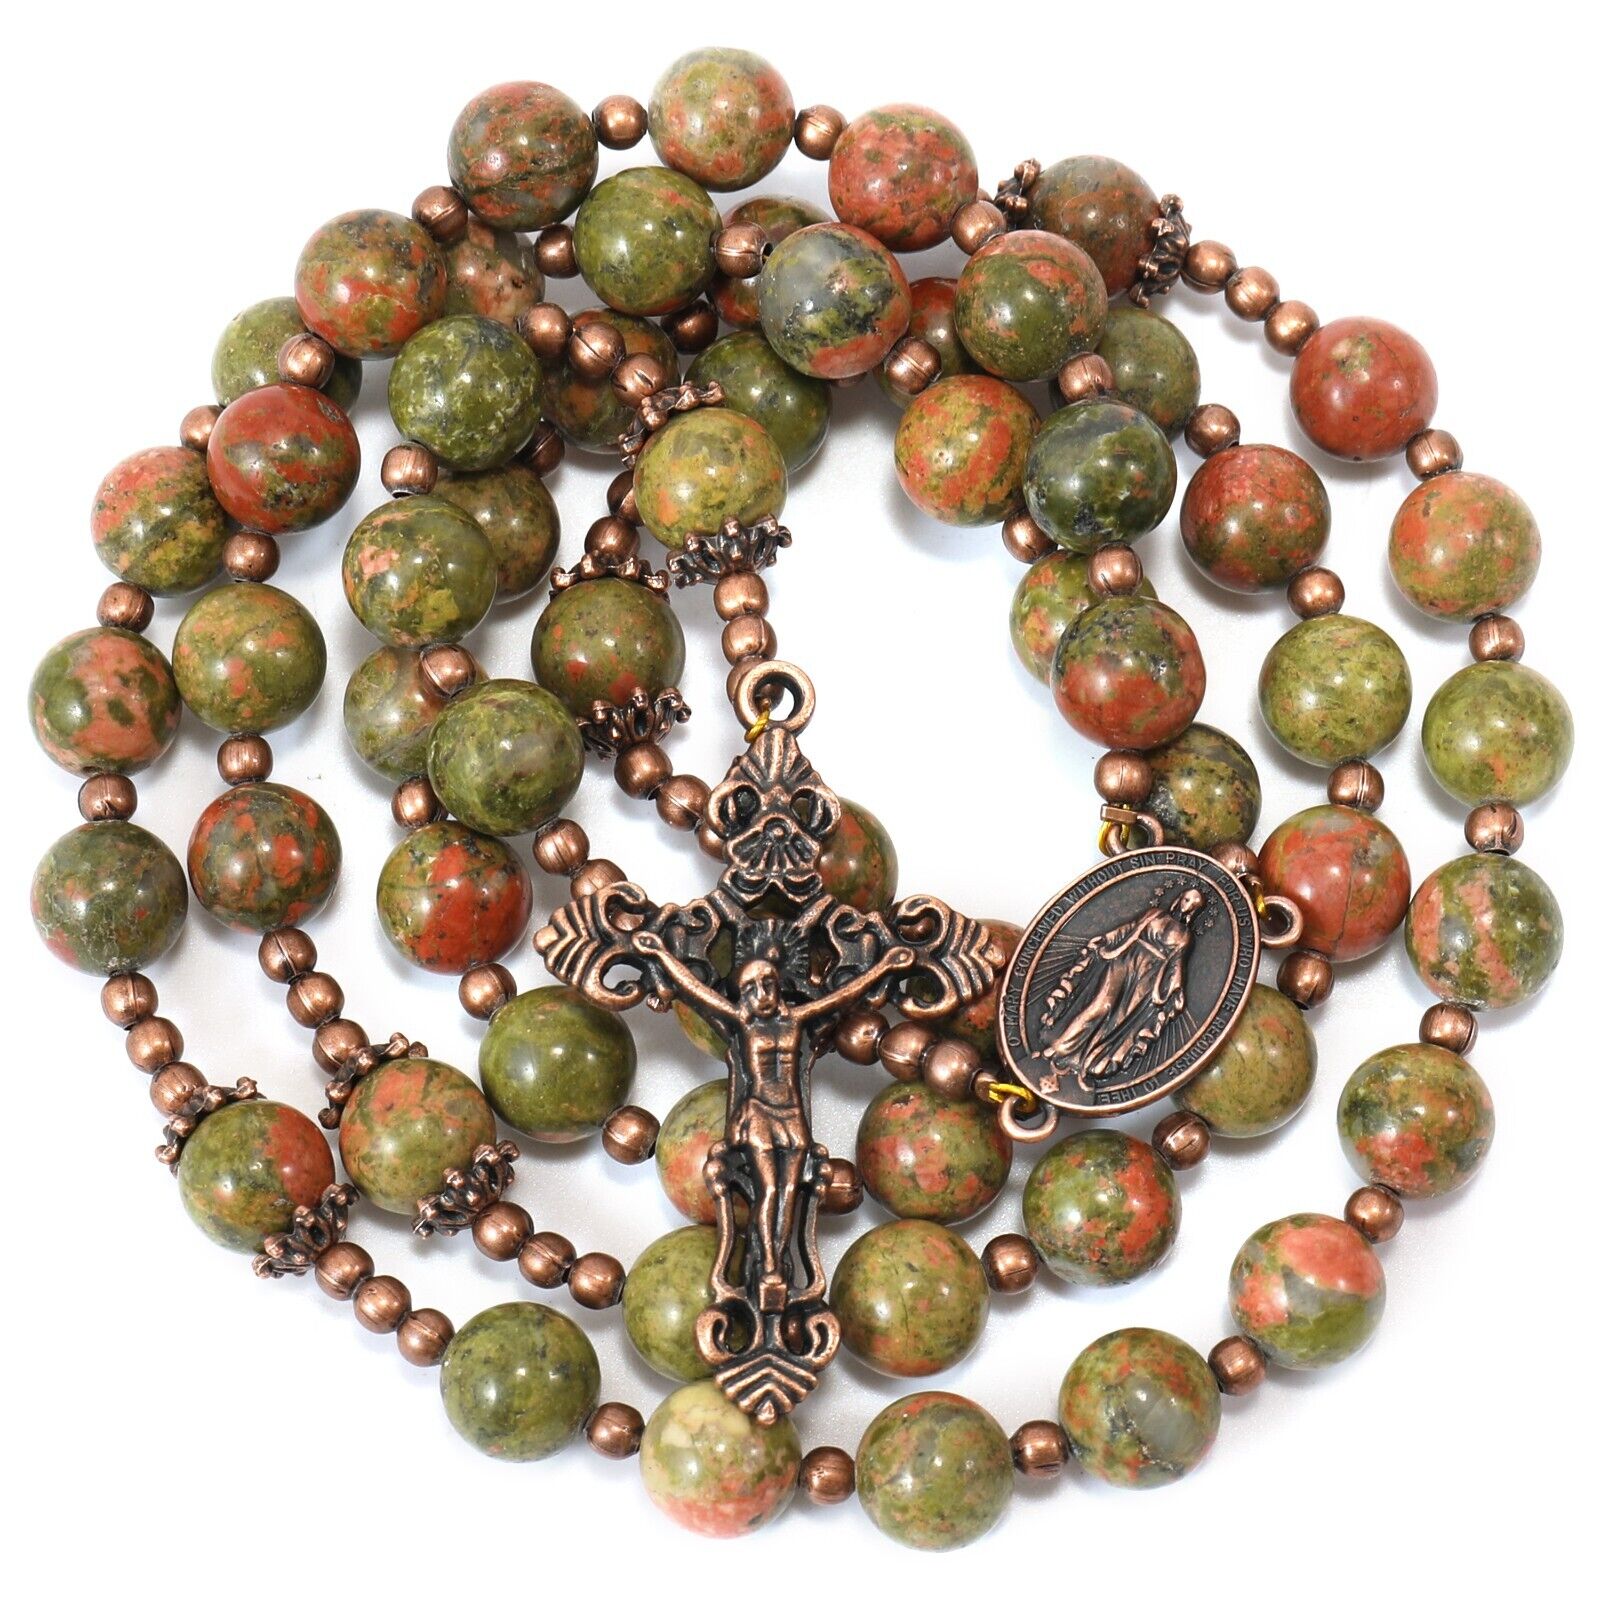 Unakite Agate Stone Beads Rosary Necklace Antique Copper Glory Beads Miraculous